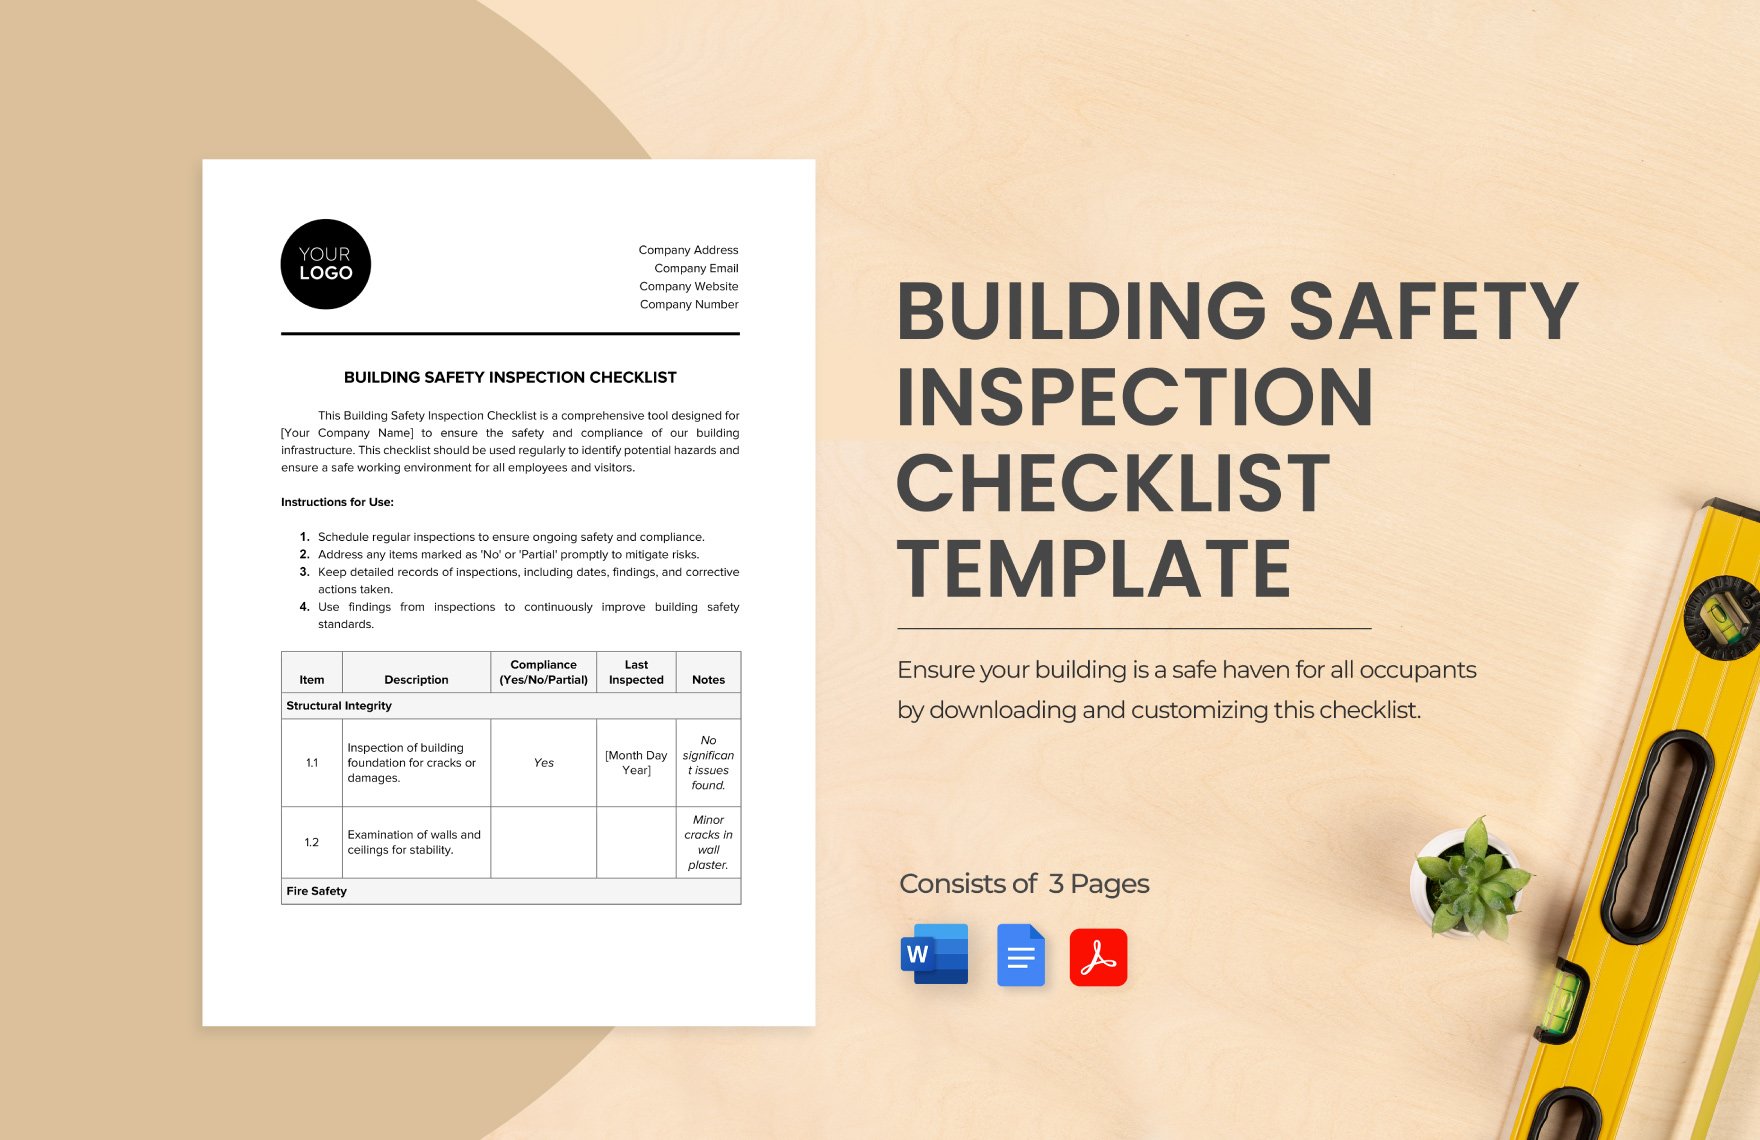 Building Safety Inspection Checklist Template